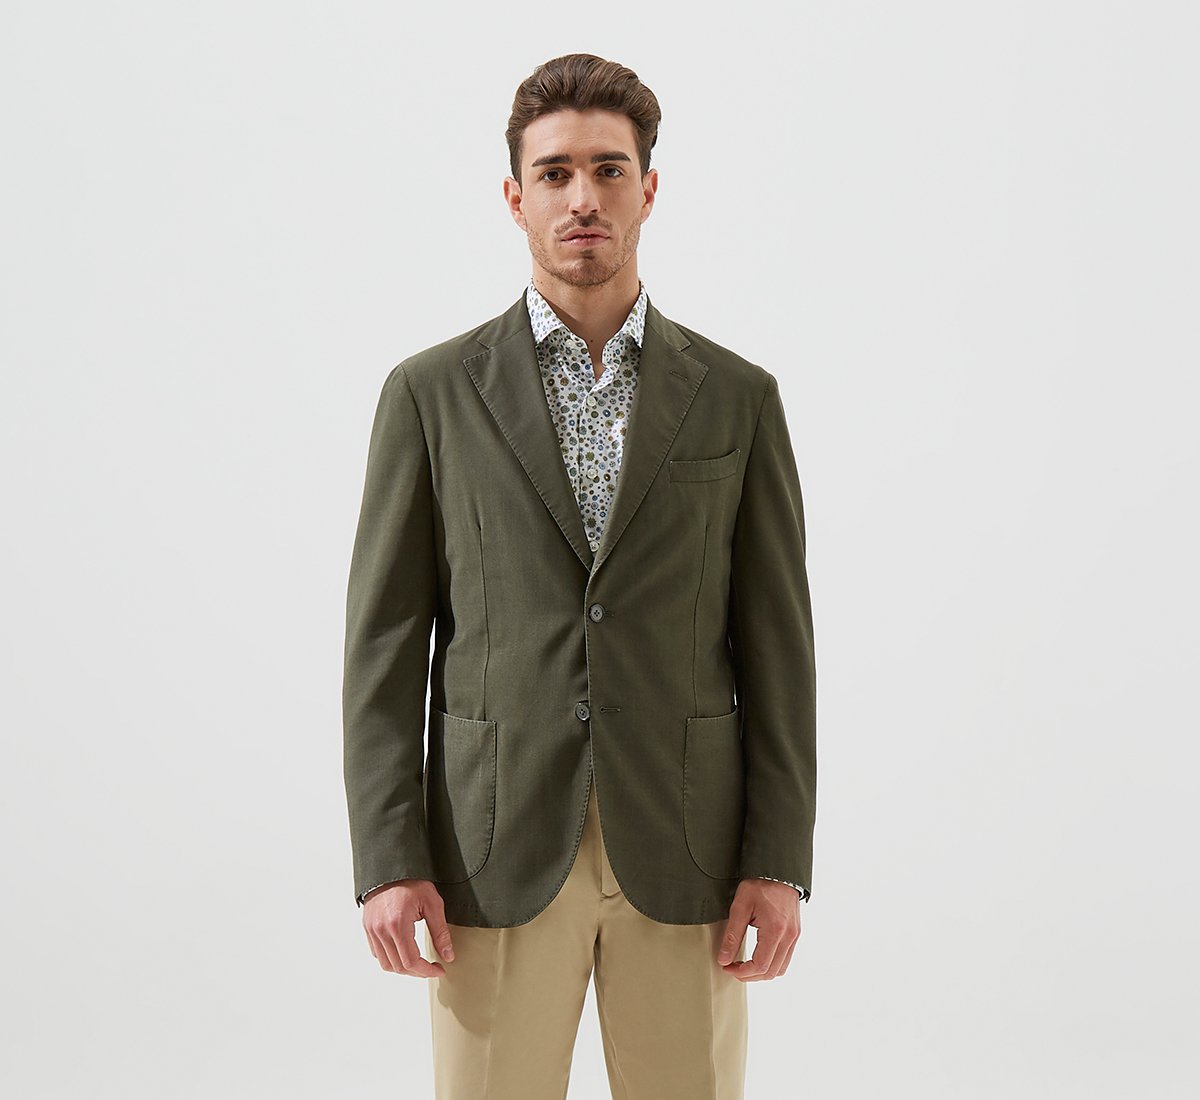 MILITARY GREEN BLAZER WITH VISIBLE STITCHING